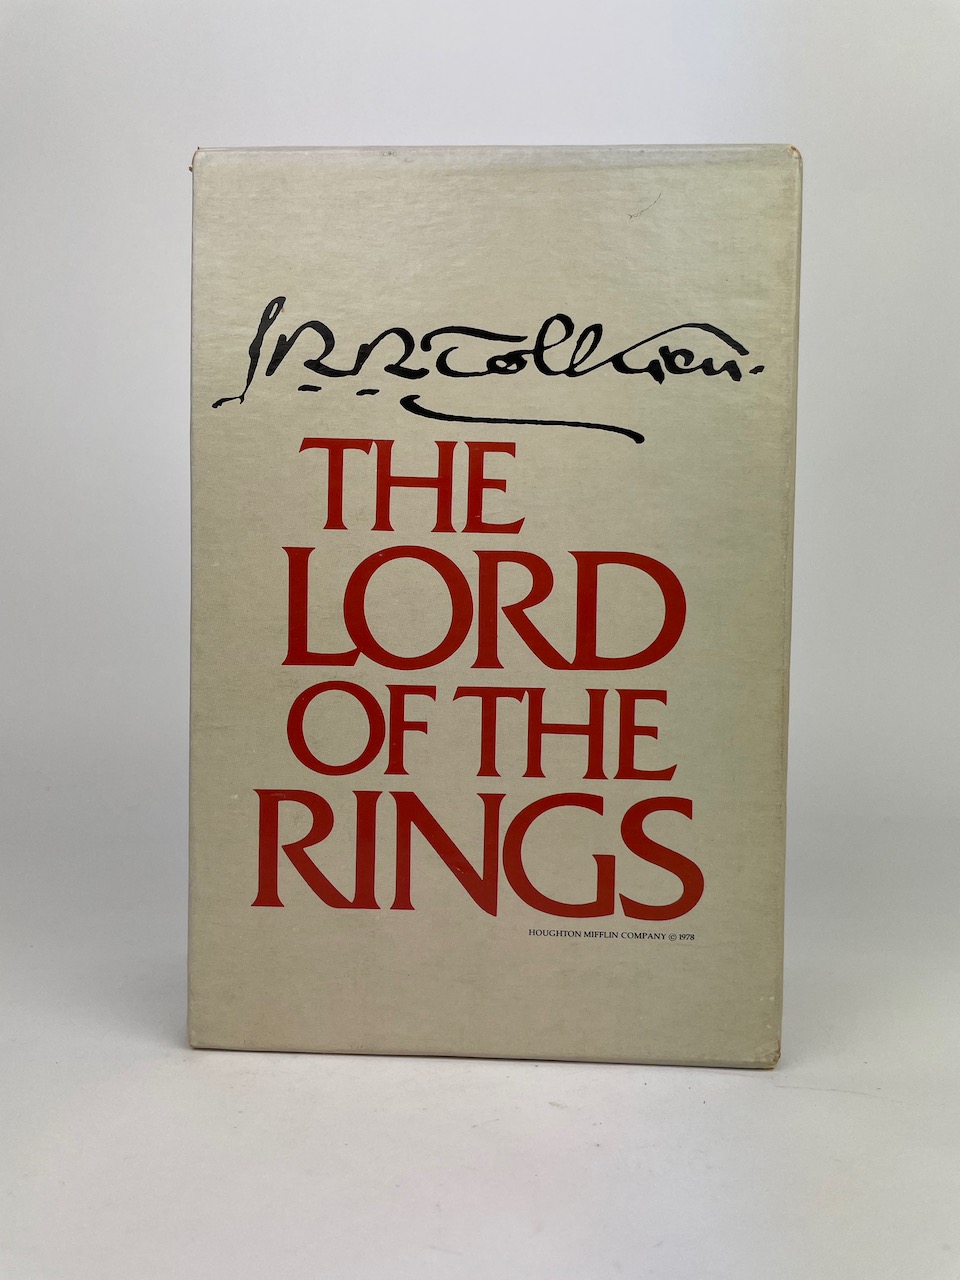 The Lord of the Rings JRR Tolkien Signature set from 1978, by Houghton Mifflin 4